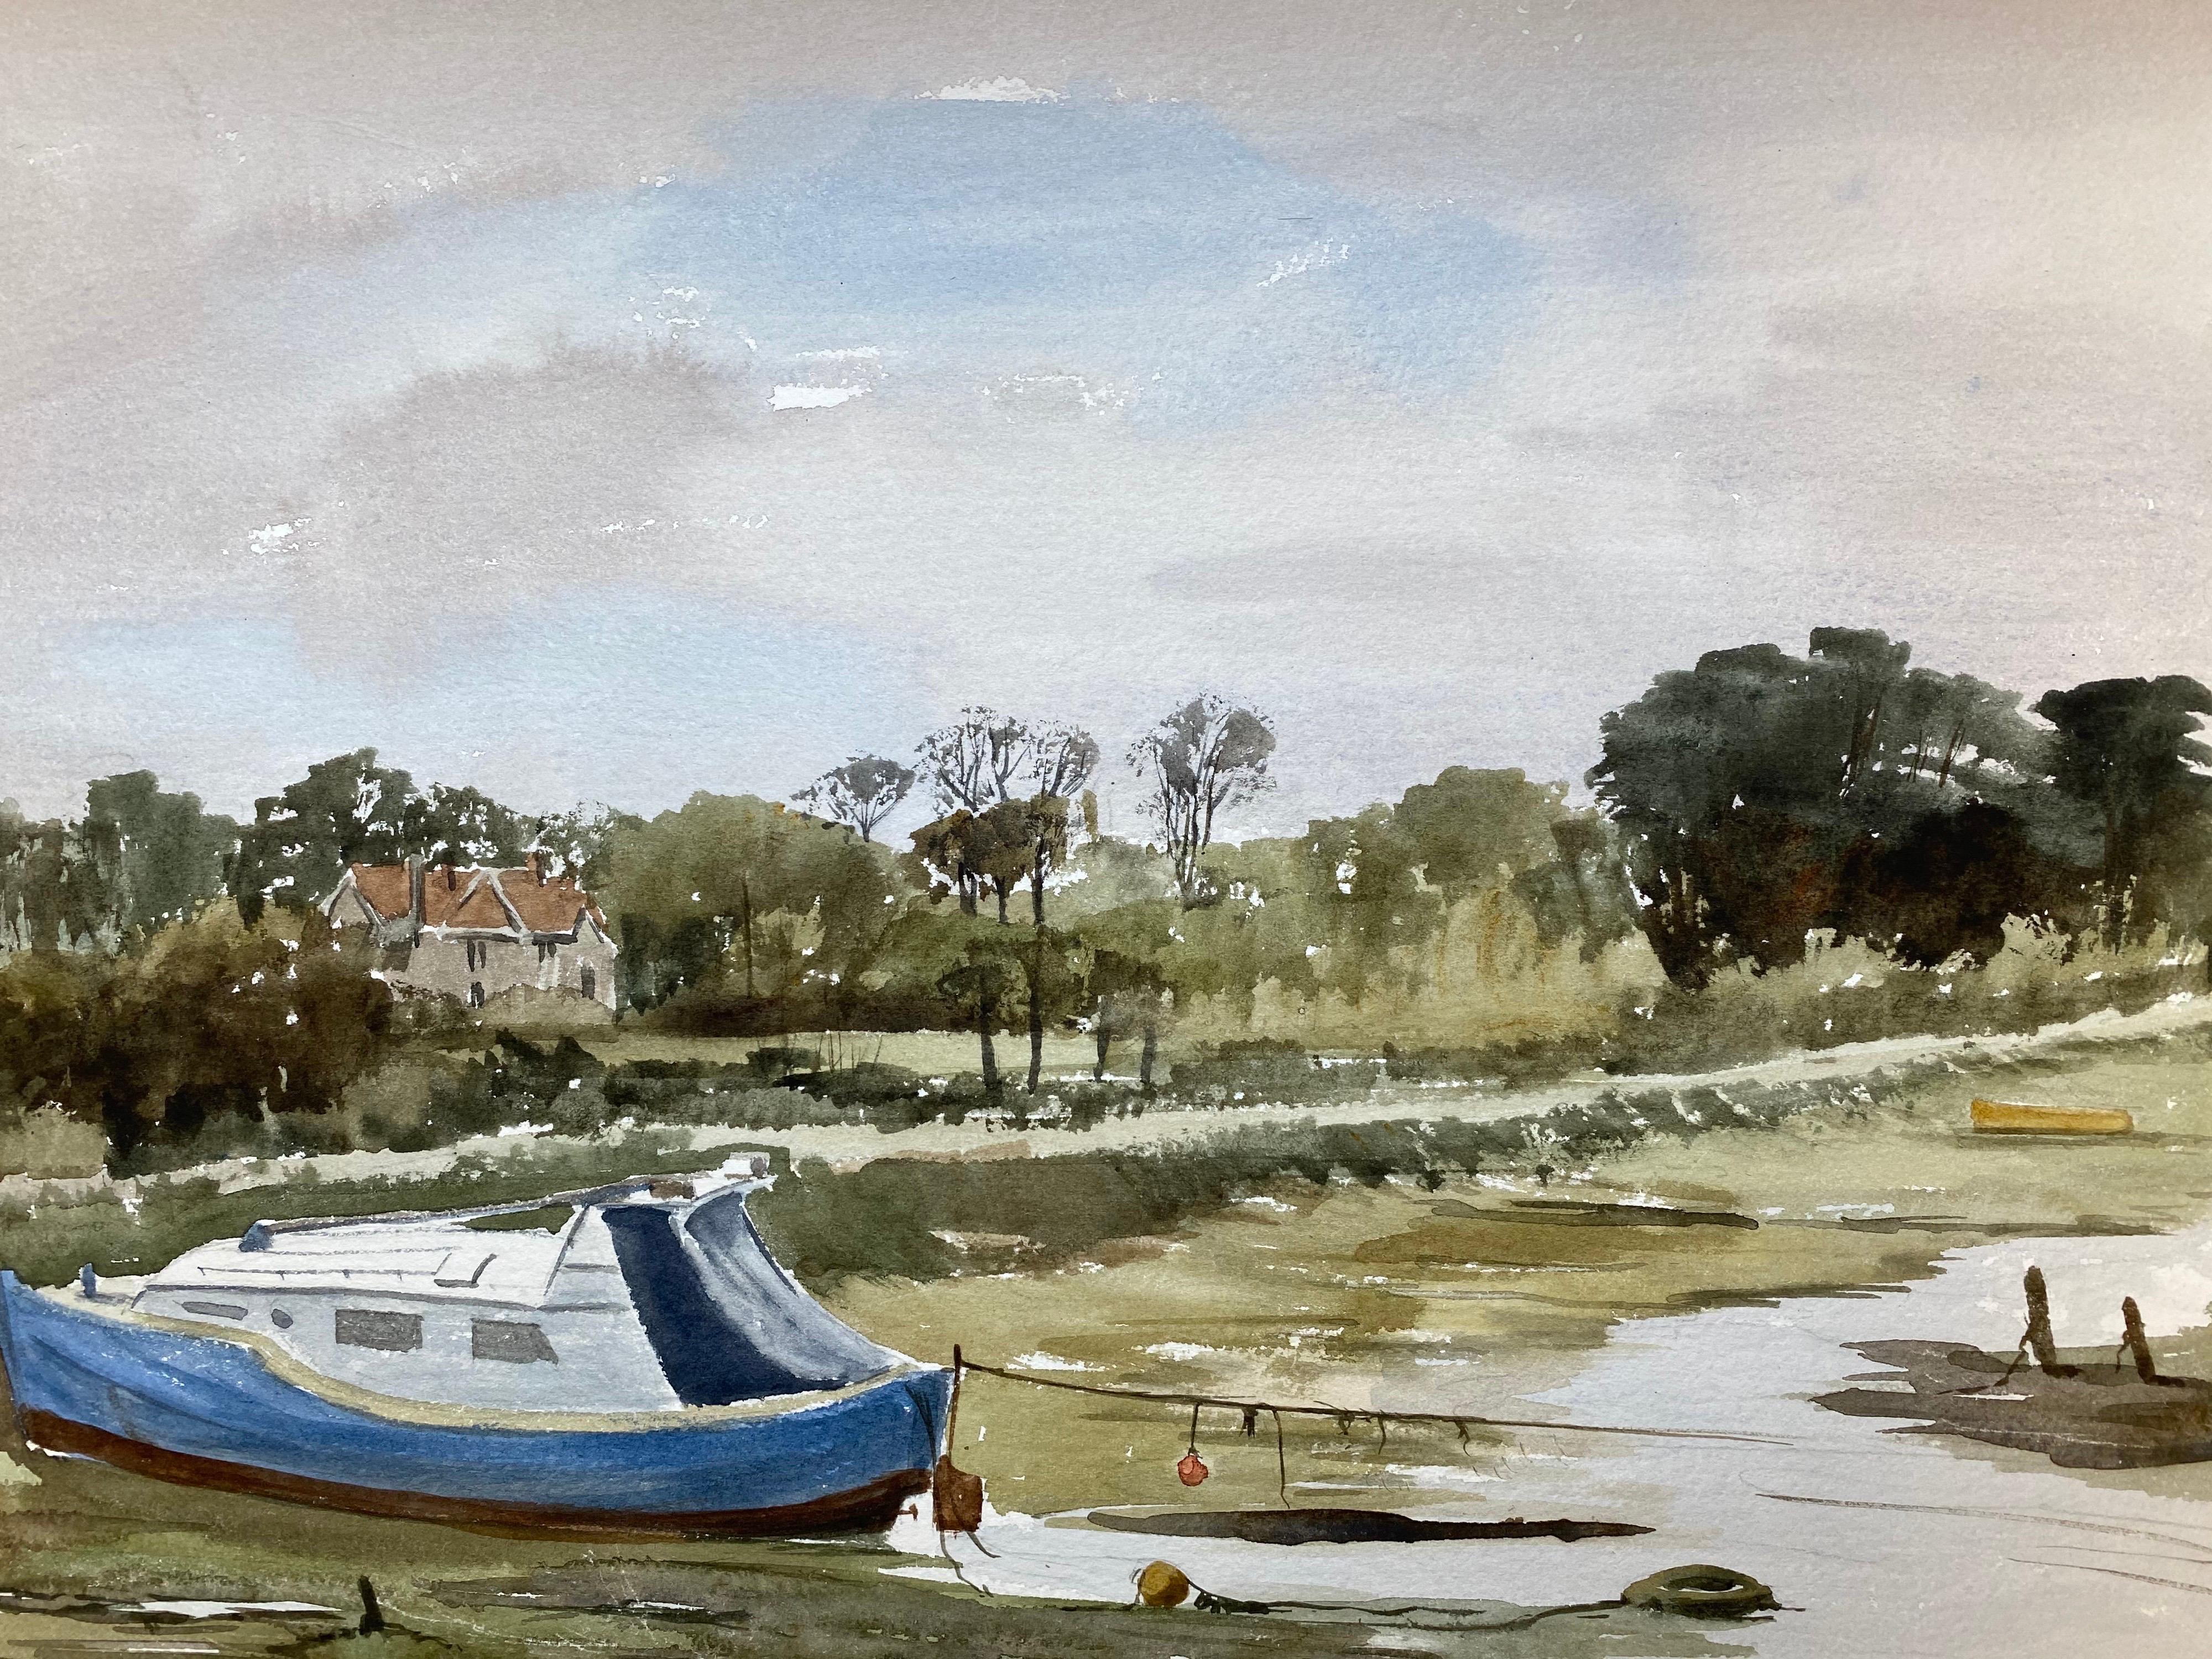 Low Tide Yarmouth Harbour - Original British Watercolour Painting - Gray Landscape Painting by Ronald Birch